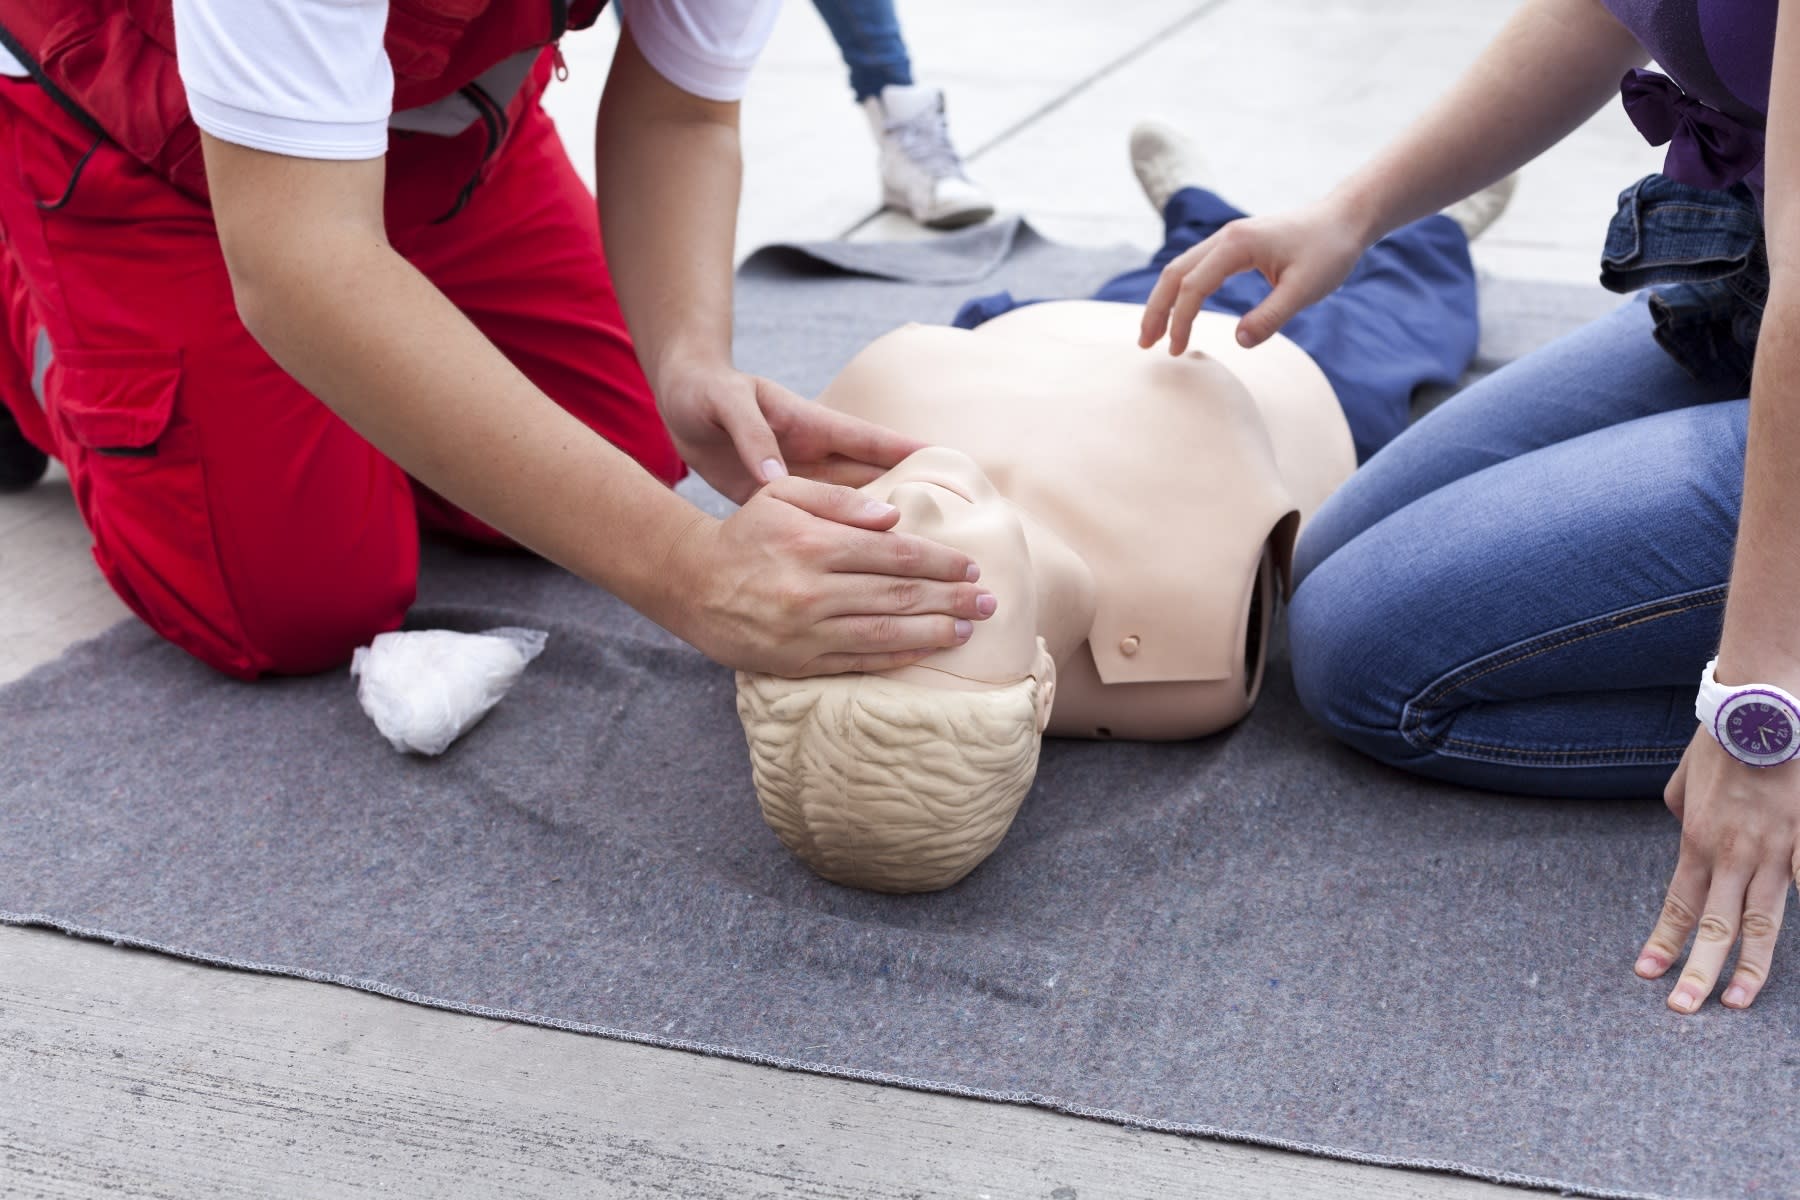 A helper opens the airway of a CPR mannequin by slightly tilting its head back and lifting its chin